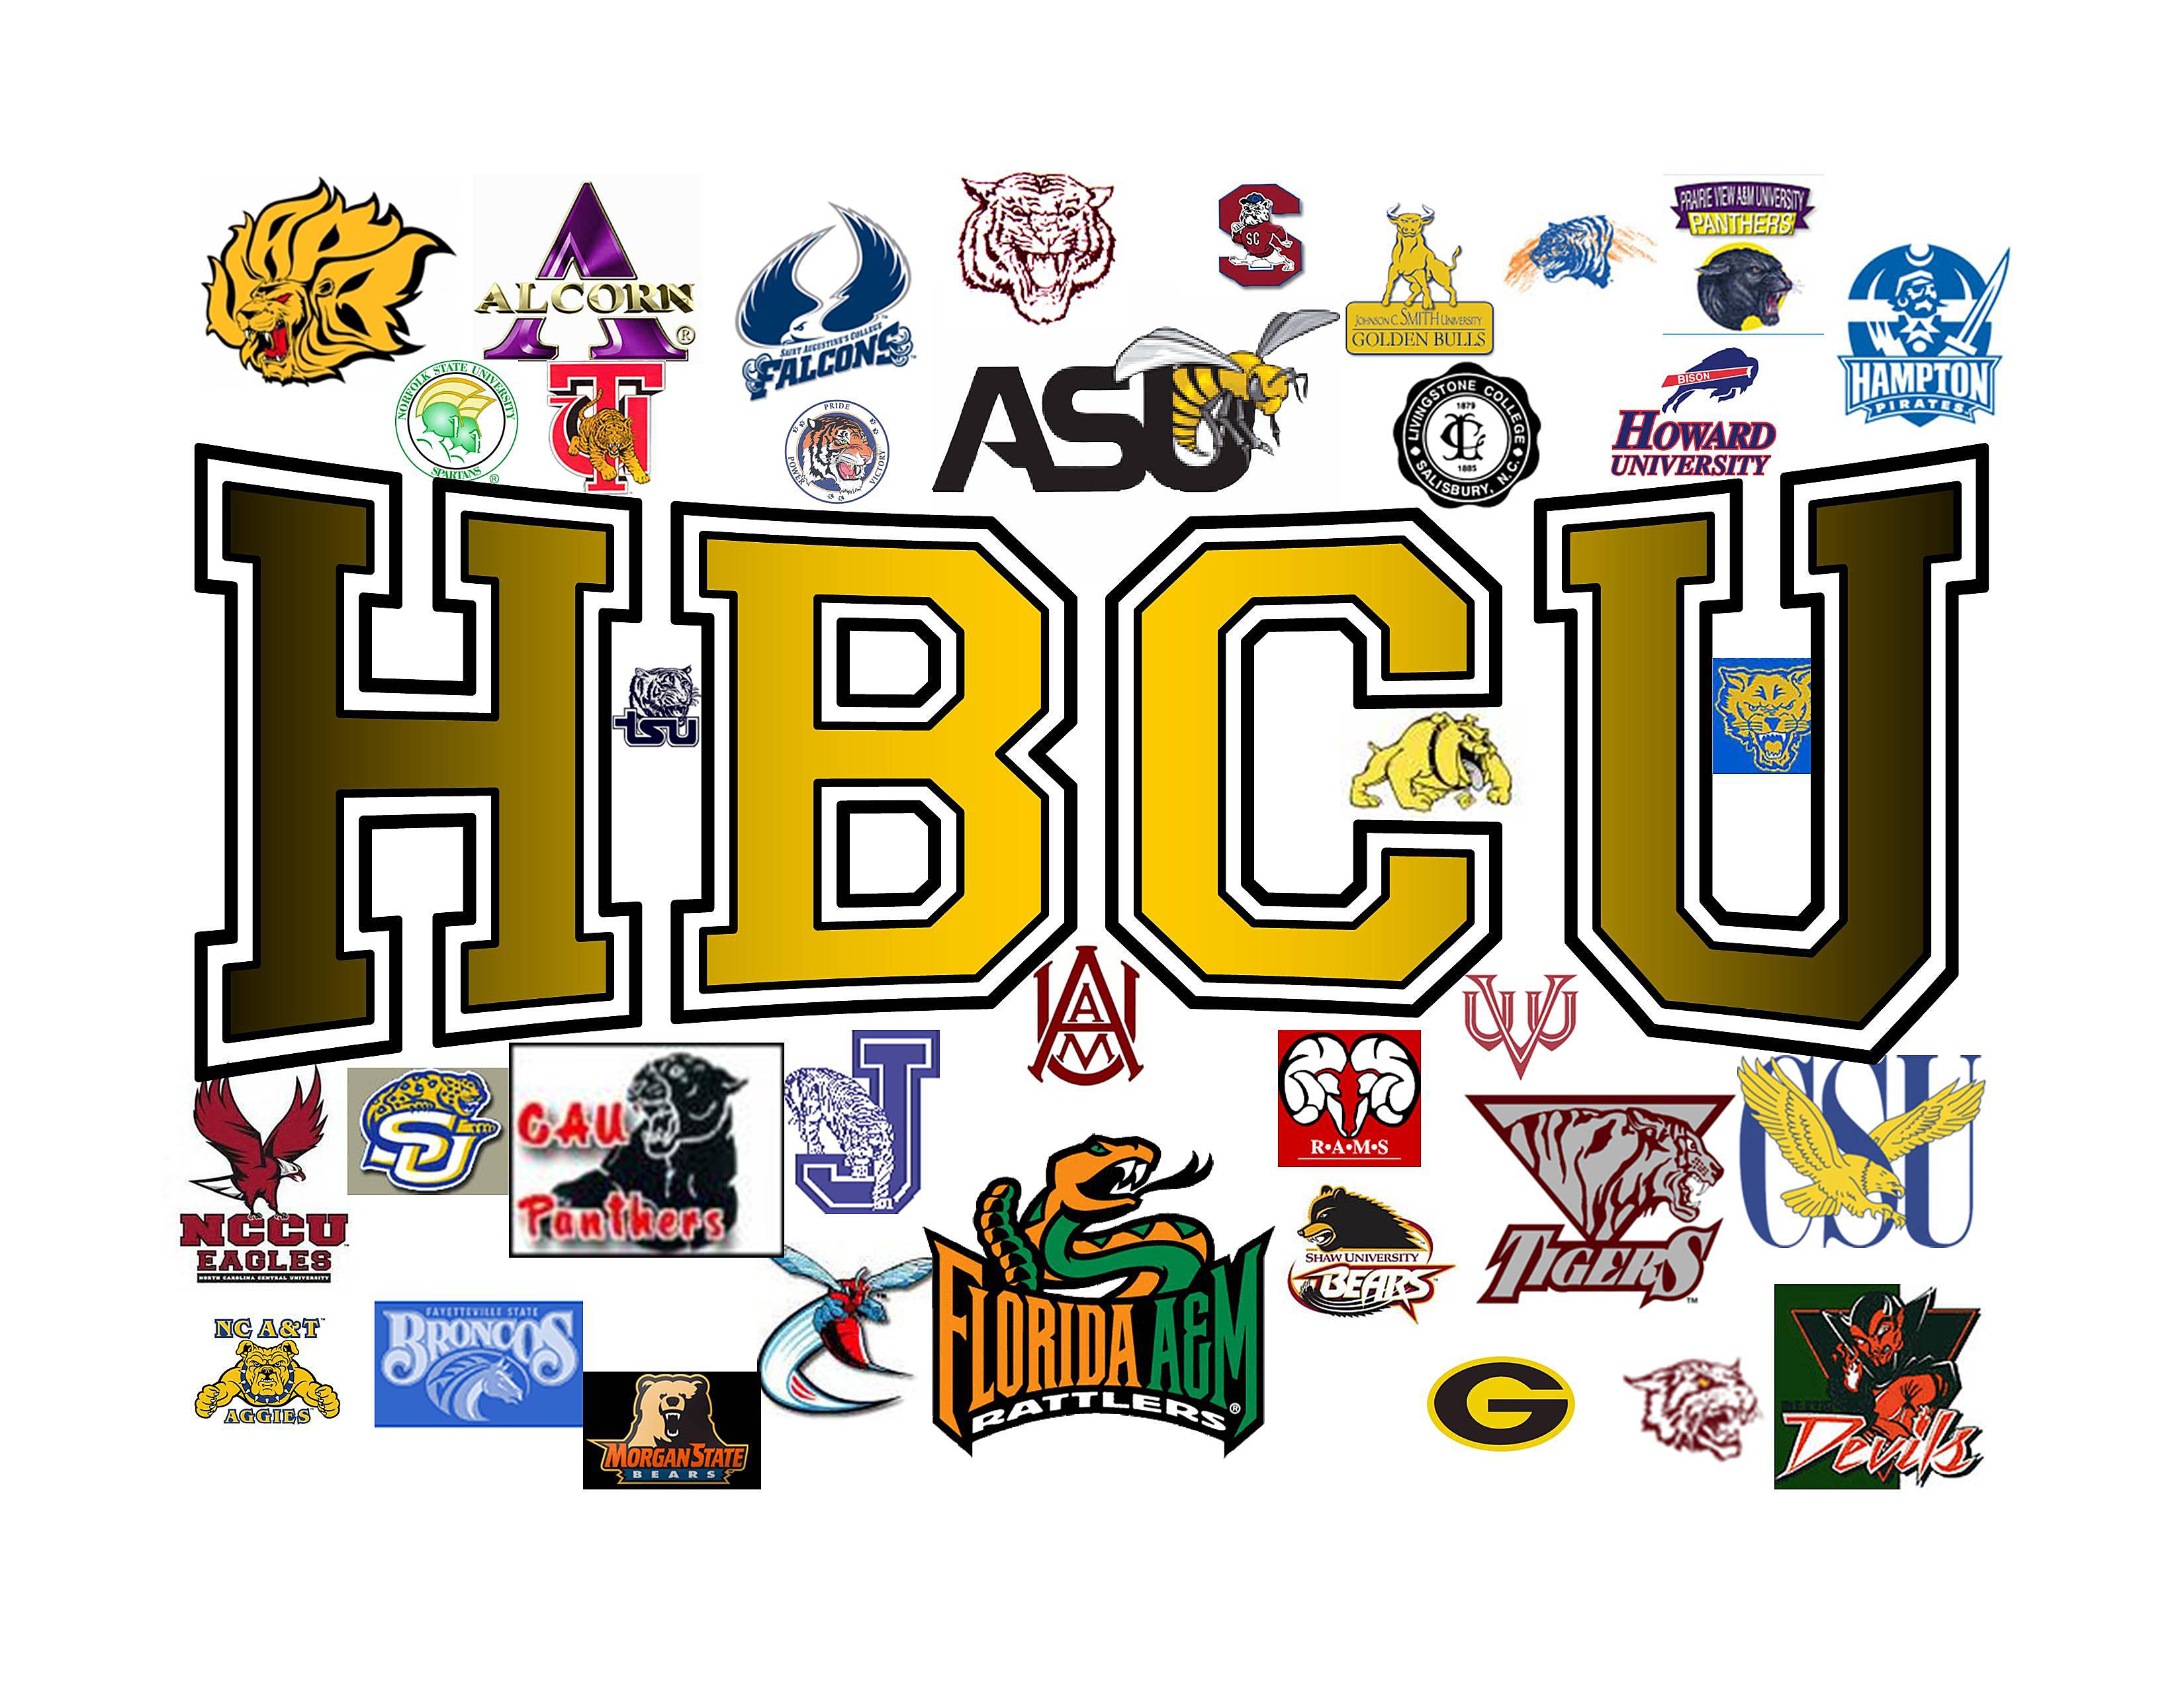 NCAA Seeks to Address Athletes’ Academic Progress at HBCUs - The NCAA is set to look into the academic disparity between athletes at HBCU campuses and those at predominantly white schools. Last year, 33 out of the 103 schools penalized for not having an acceptable APR (the Academic Progress Rate) for athletes, a high ratio considering the small number of HBCUs in comparison to other schools.&nbsp;